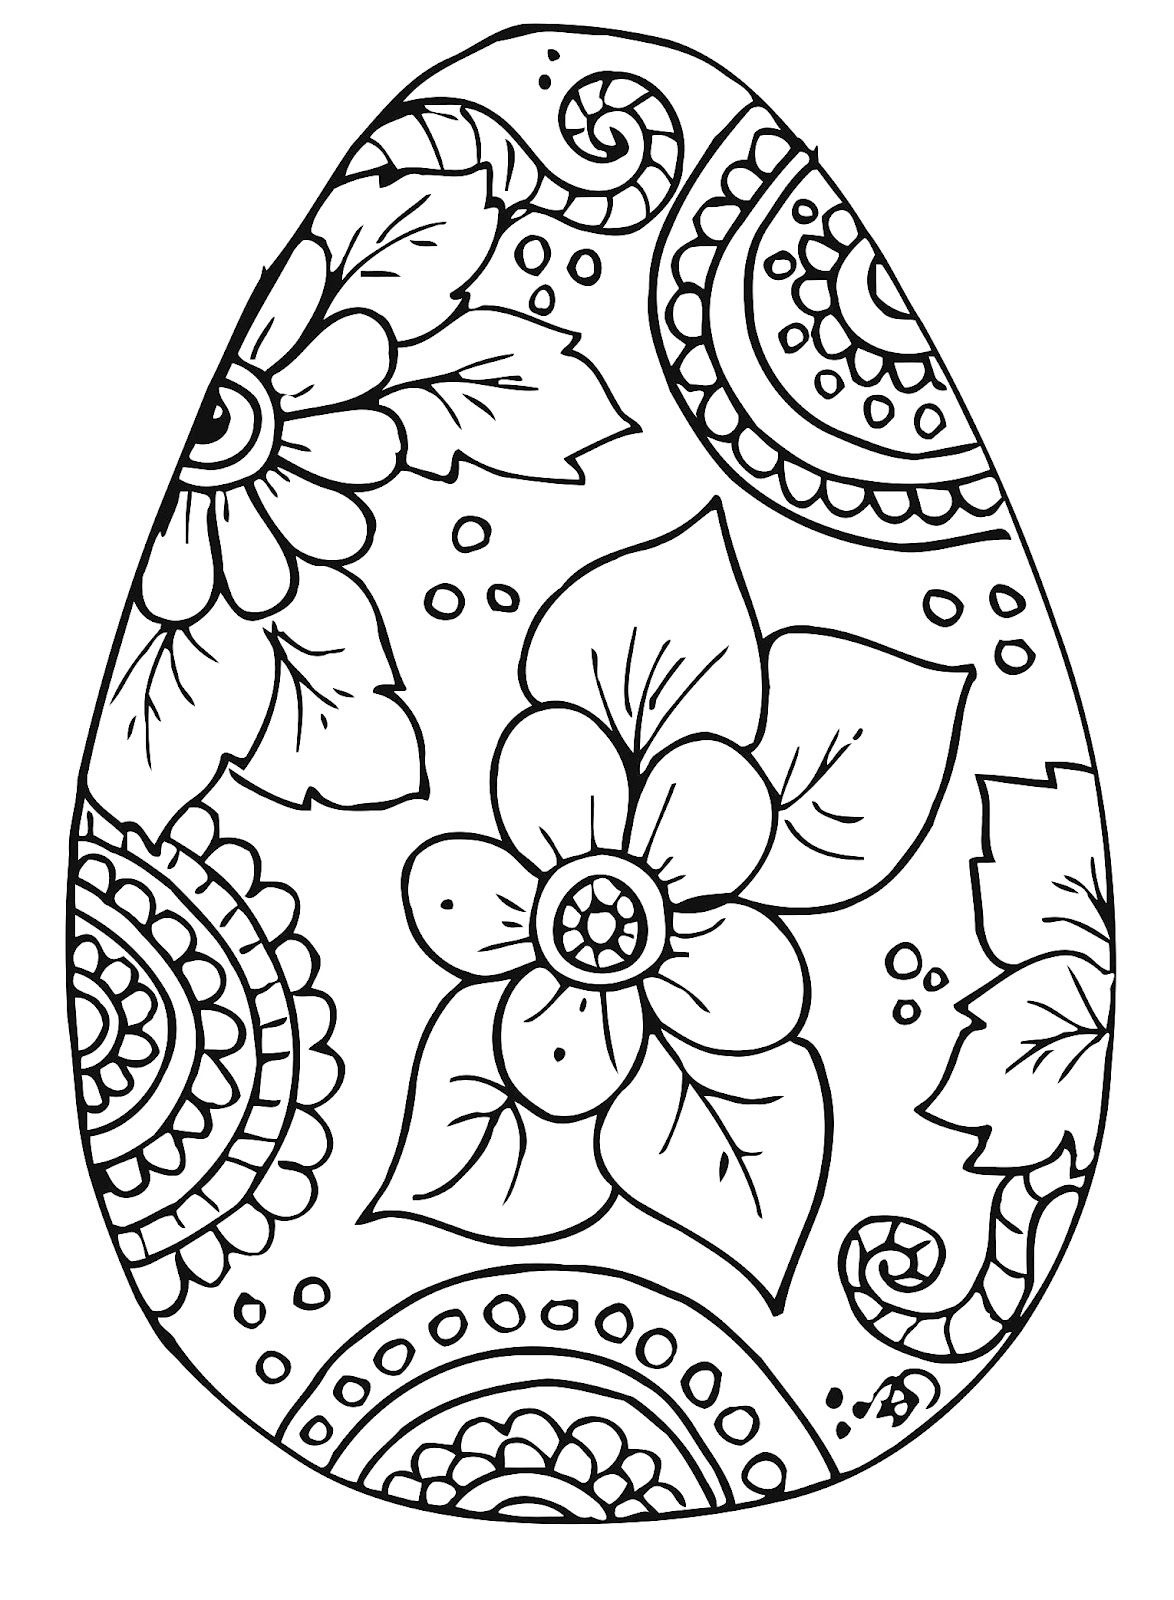 B.d.designs: 3 Free Coloring Pages For Easter / Kleurplaat Pasen - Free Easter Color Pages Printable